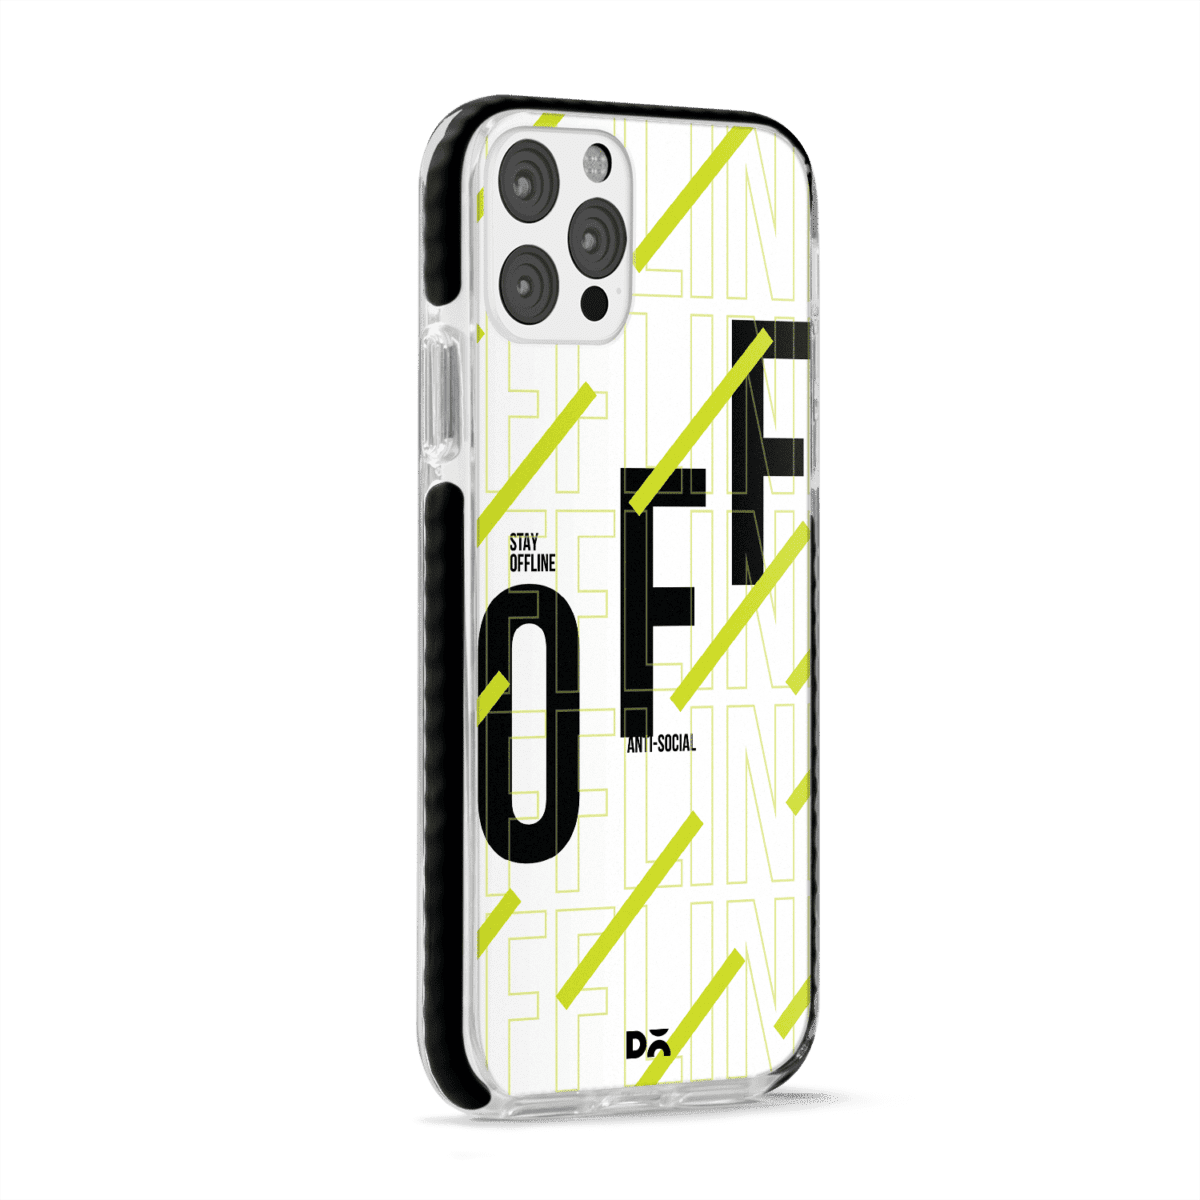 Stay Offline Stride Case Cover for Apple iPhone 12 Pro and Apple iPhone 12 Pro Max with great design and shock proof | Klippik | Online Shopping | Kuwait UAE Saudi